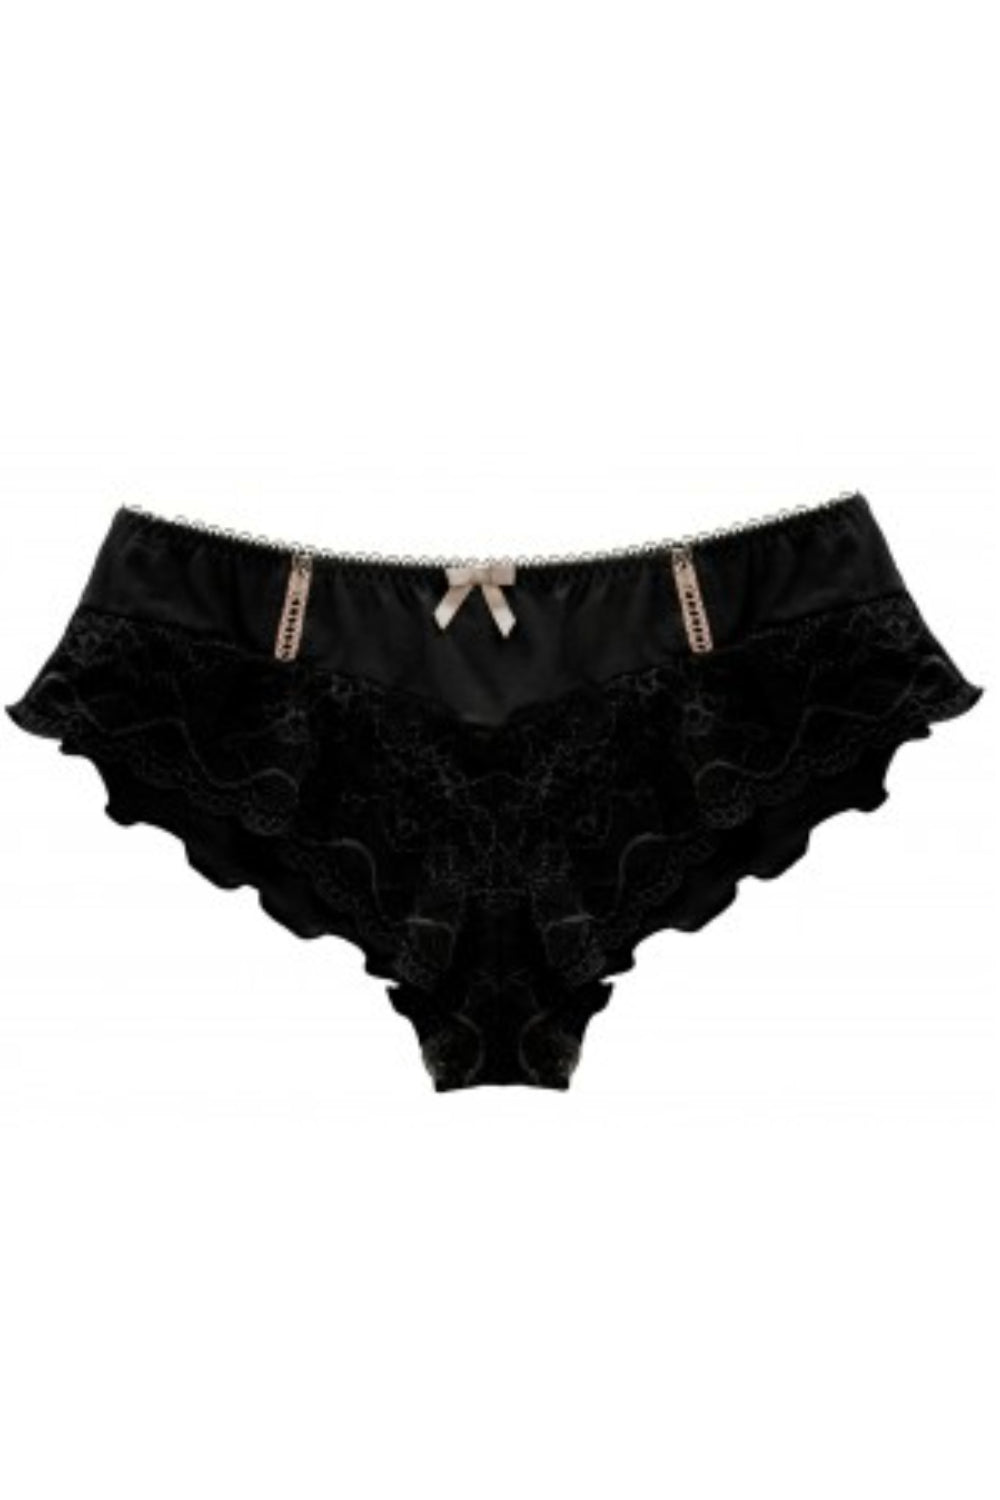 Sexy Black Maternity French Knickers